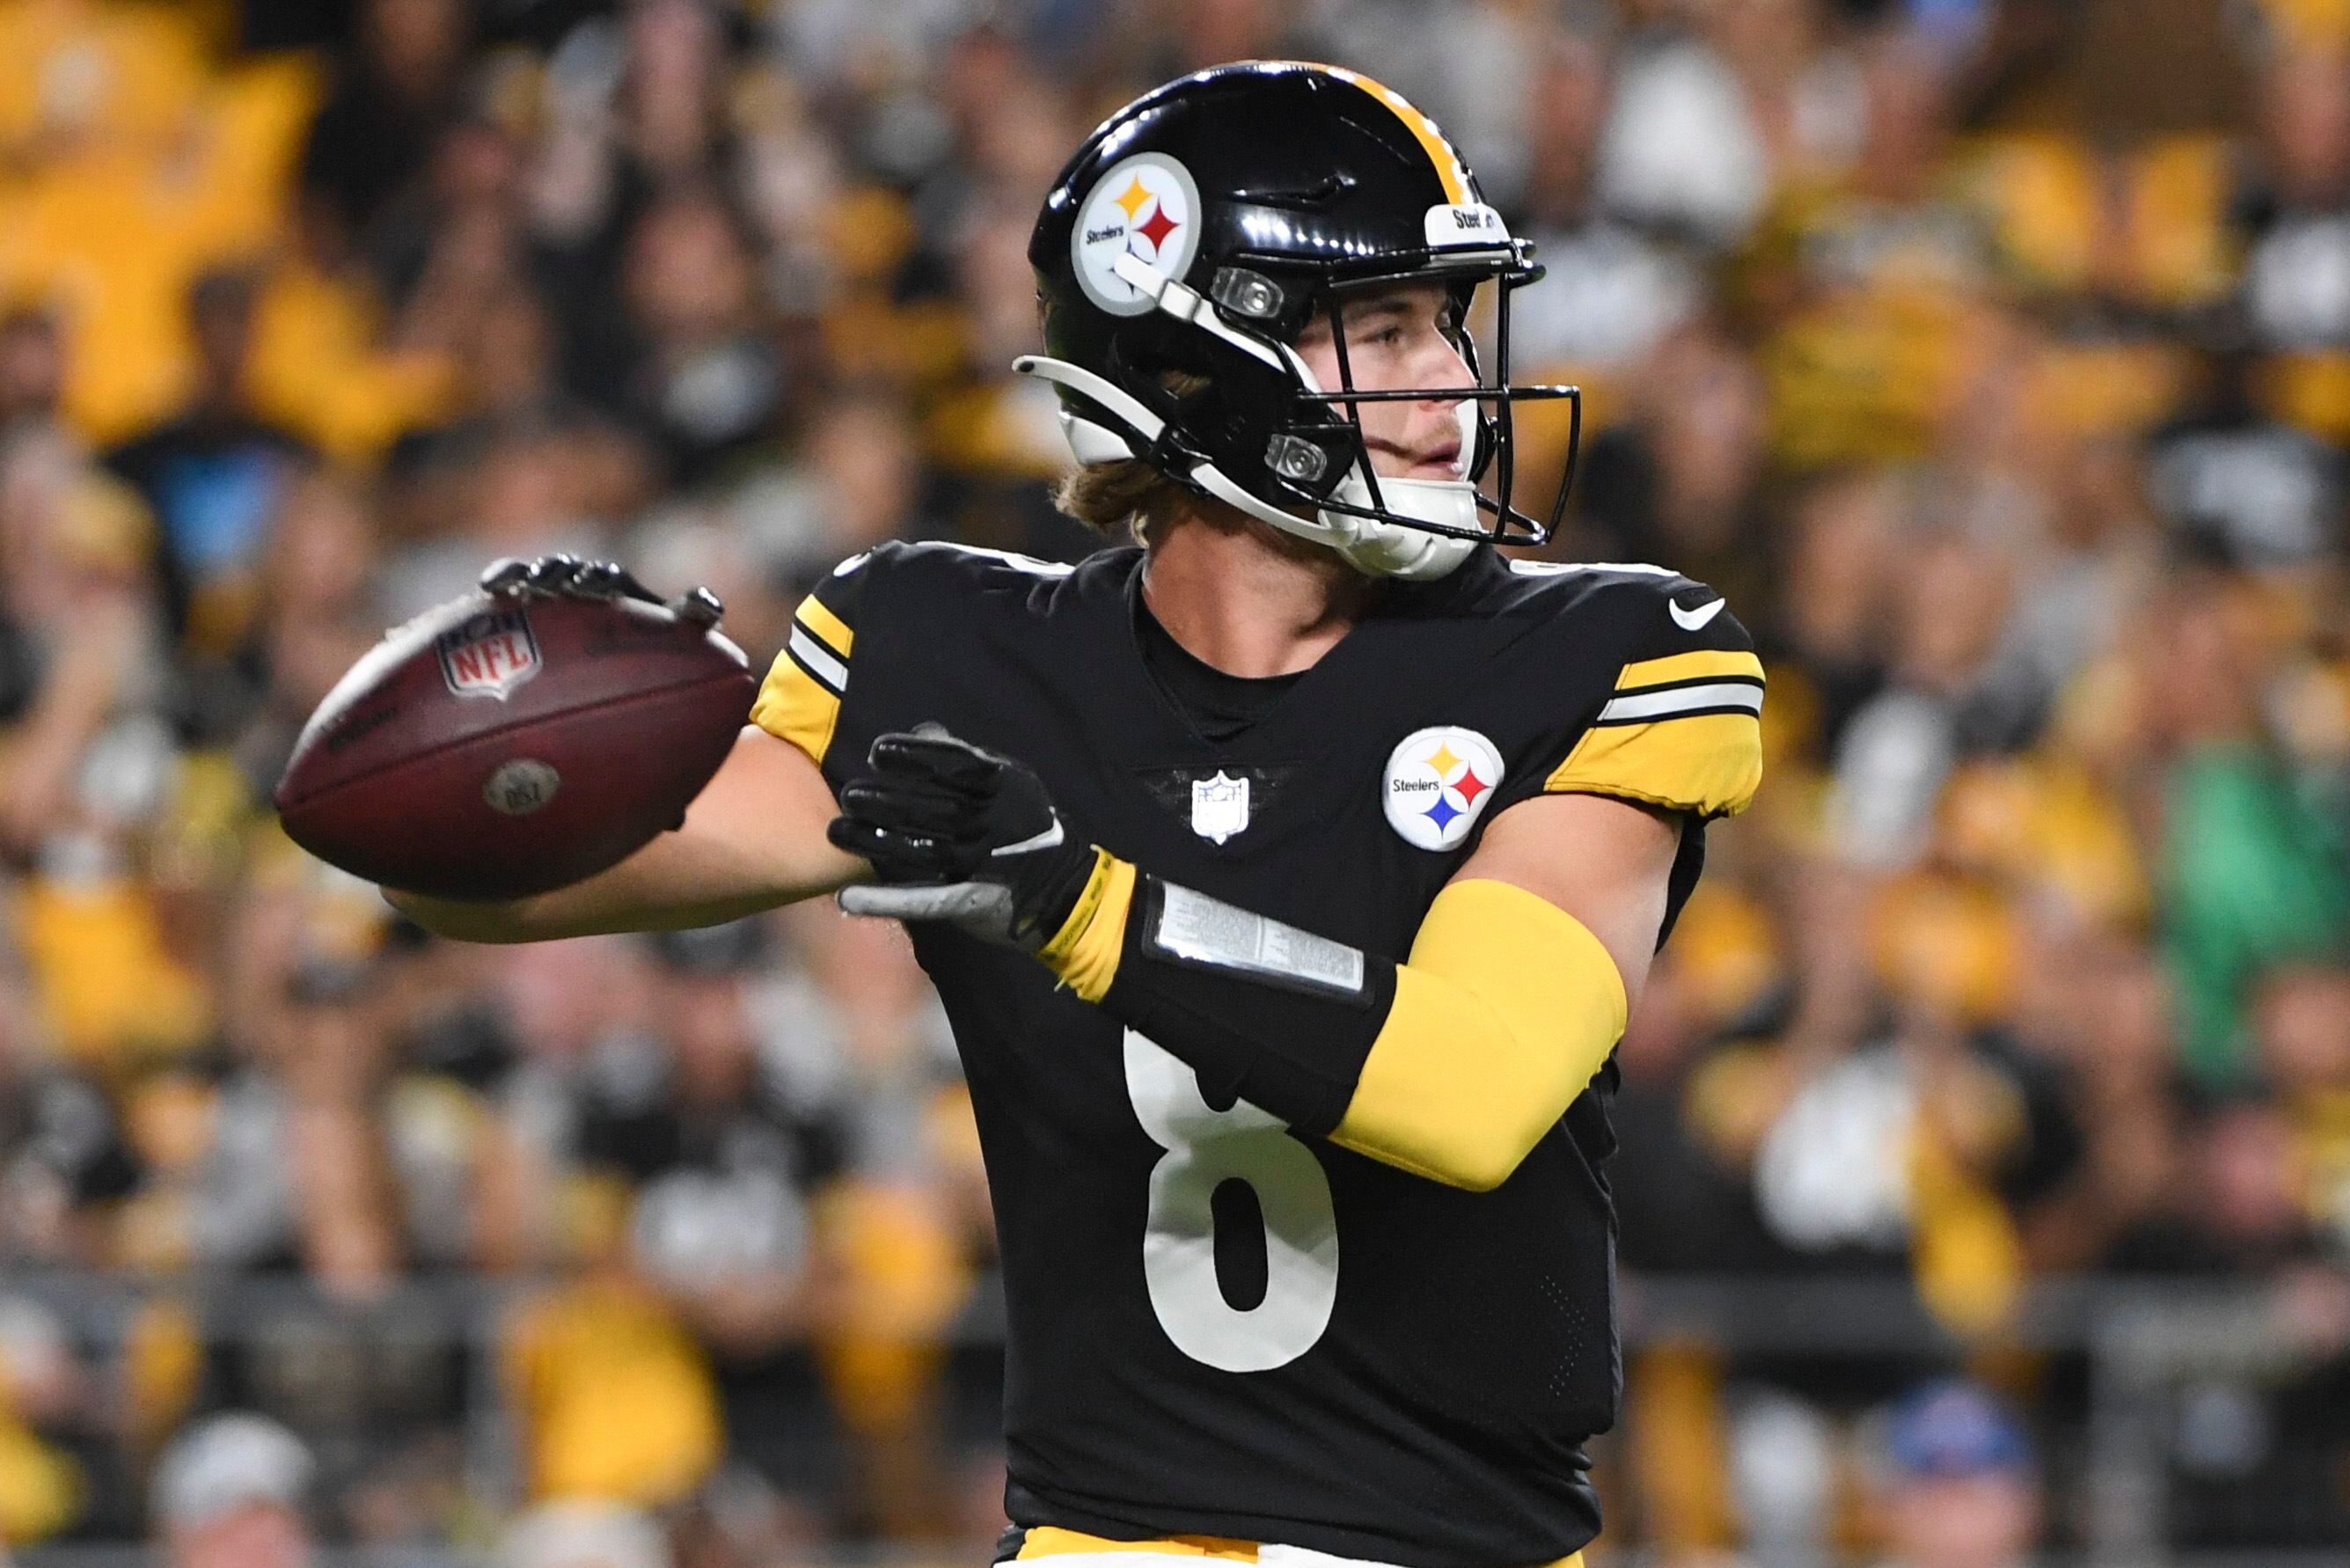 Steelers season preview: Kenny Pickett looks to turn hype into